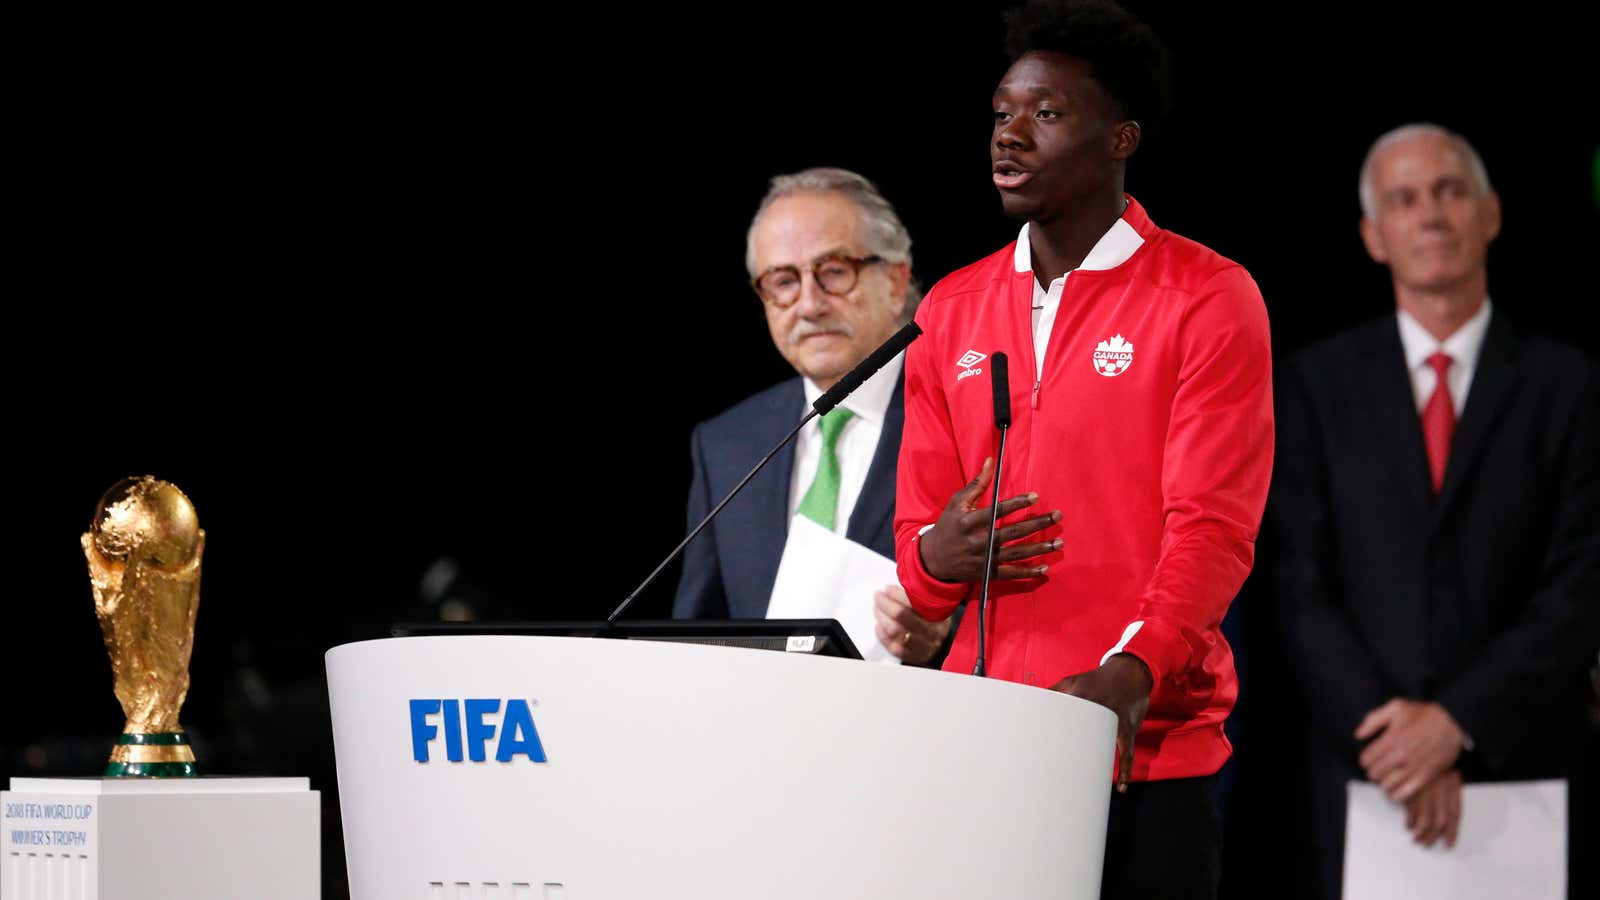 Alphonso Davies is the youngest ever player for Canada’s men’s national team.